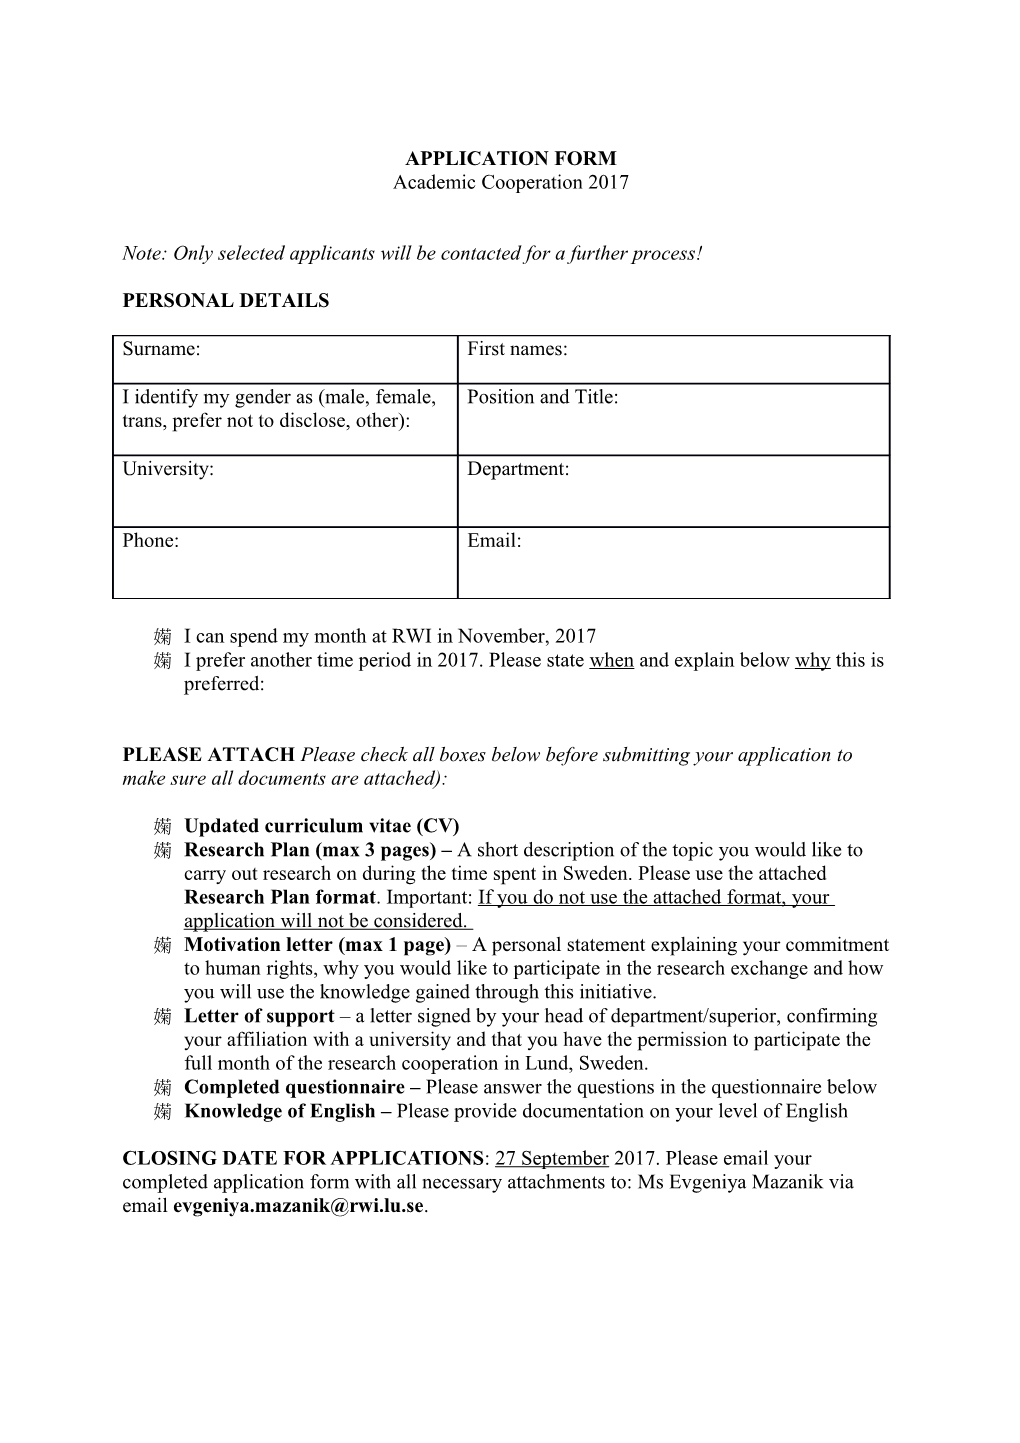 Application Form s74